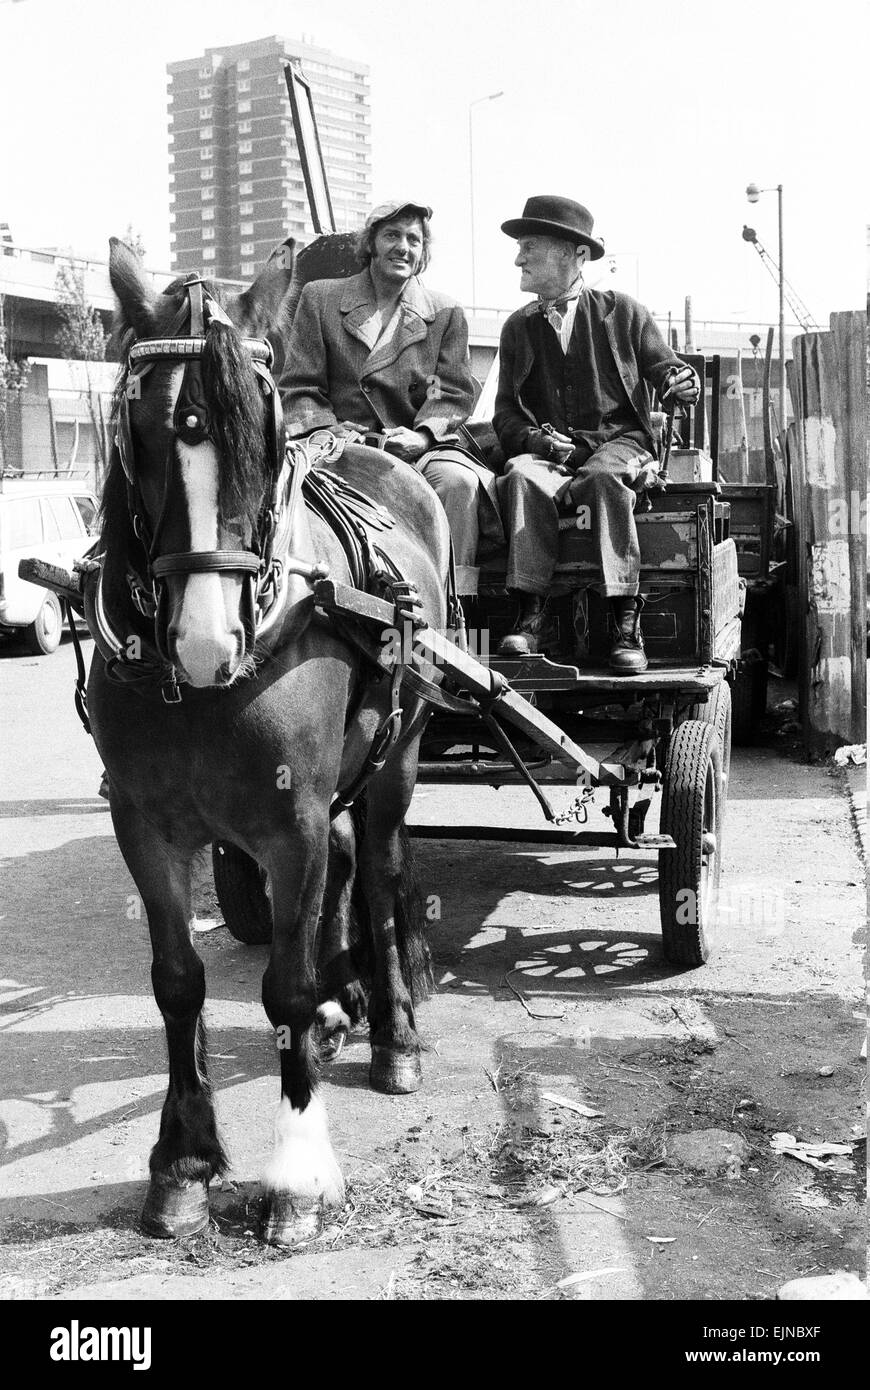 Steptoe and Son actors enjoy a pint in local pub, during break in filming of the BBC Comedy Series, Shepherds Bush, London, 20th August 1974. Actors : Wildred Brambell whp plays Albert Steptoe & Harry H Corbett his son Harold Steptoe. Stock Photo